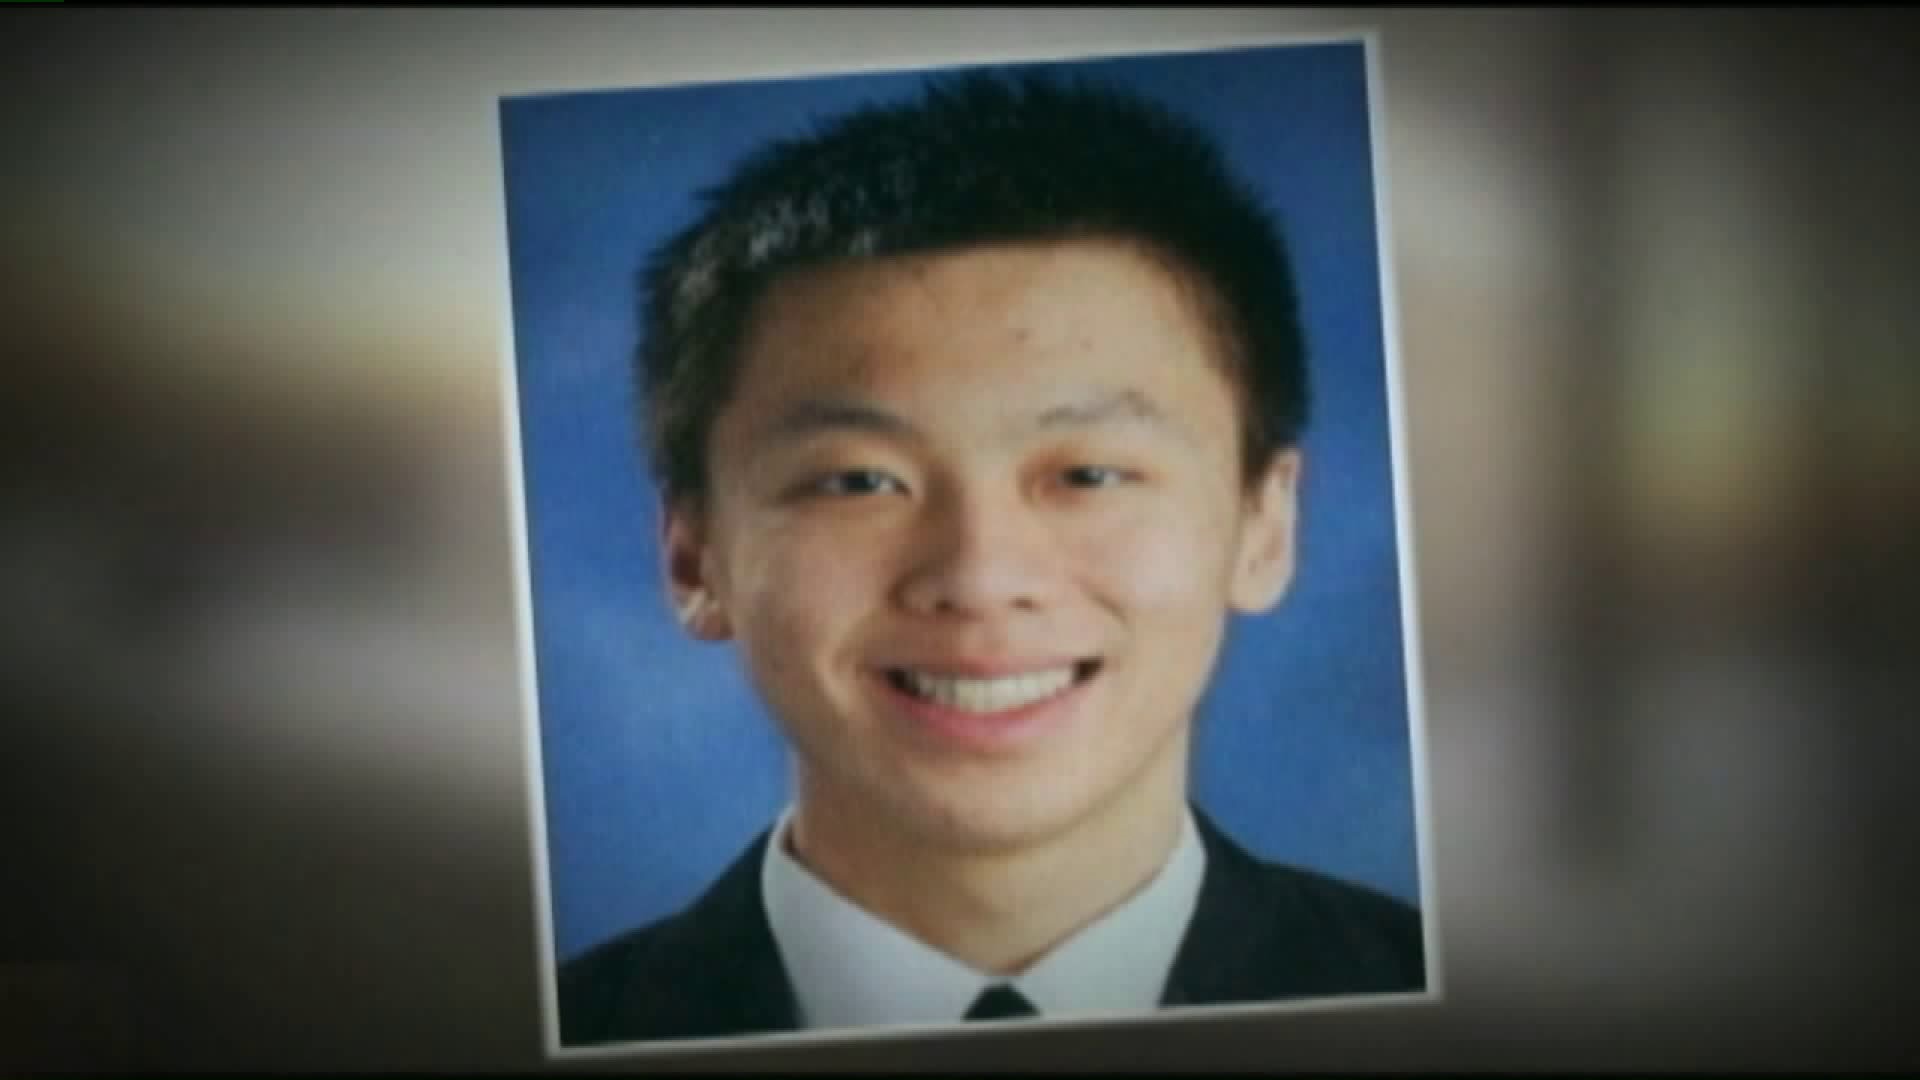 Four Fraternity Brothers Plead Guilty For Pledges Death In Hazing Ritual